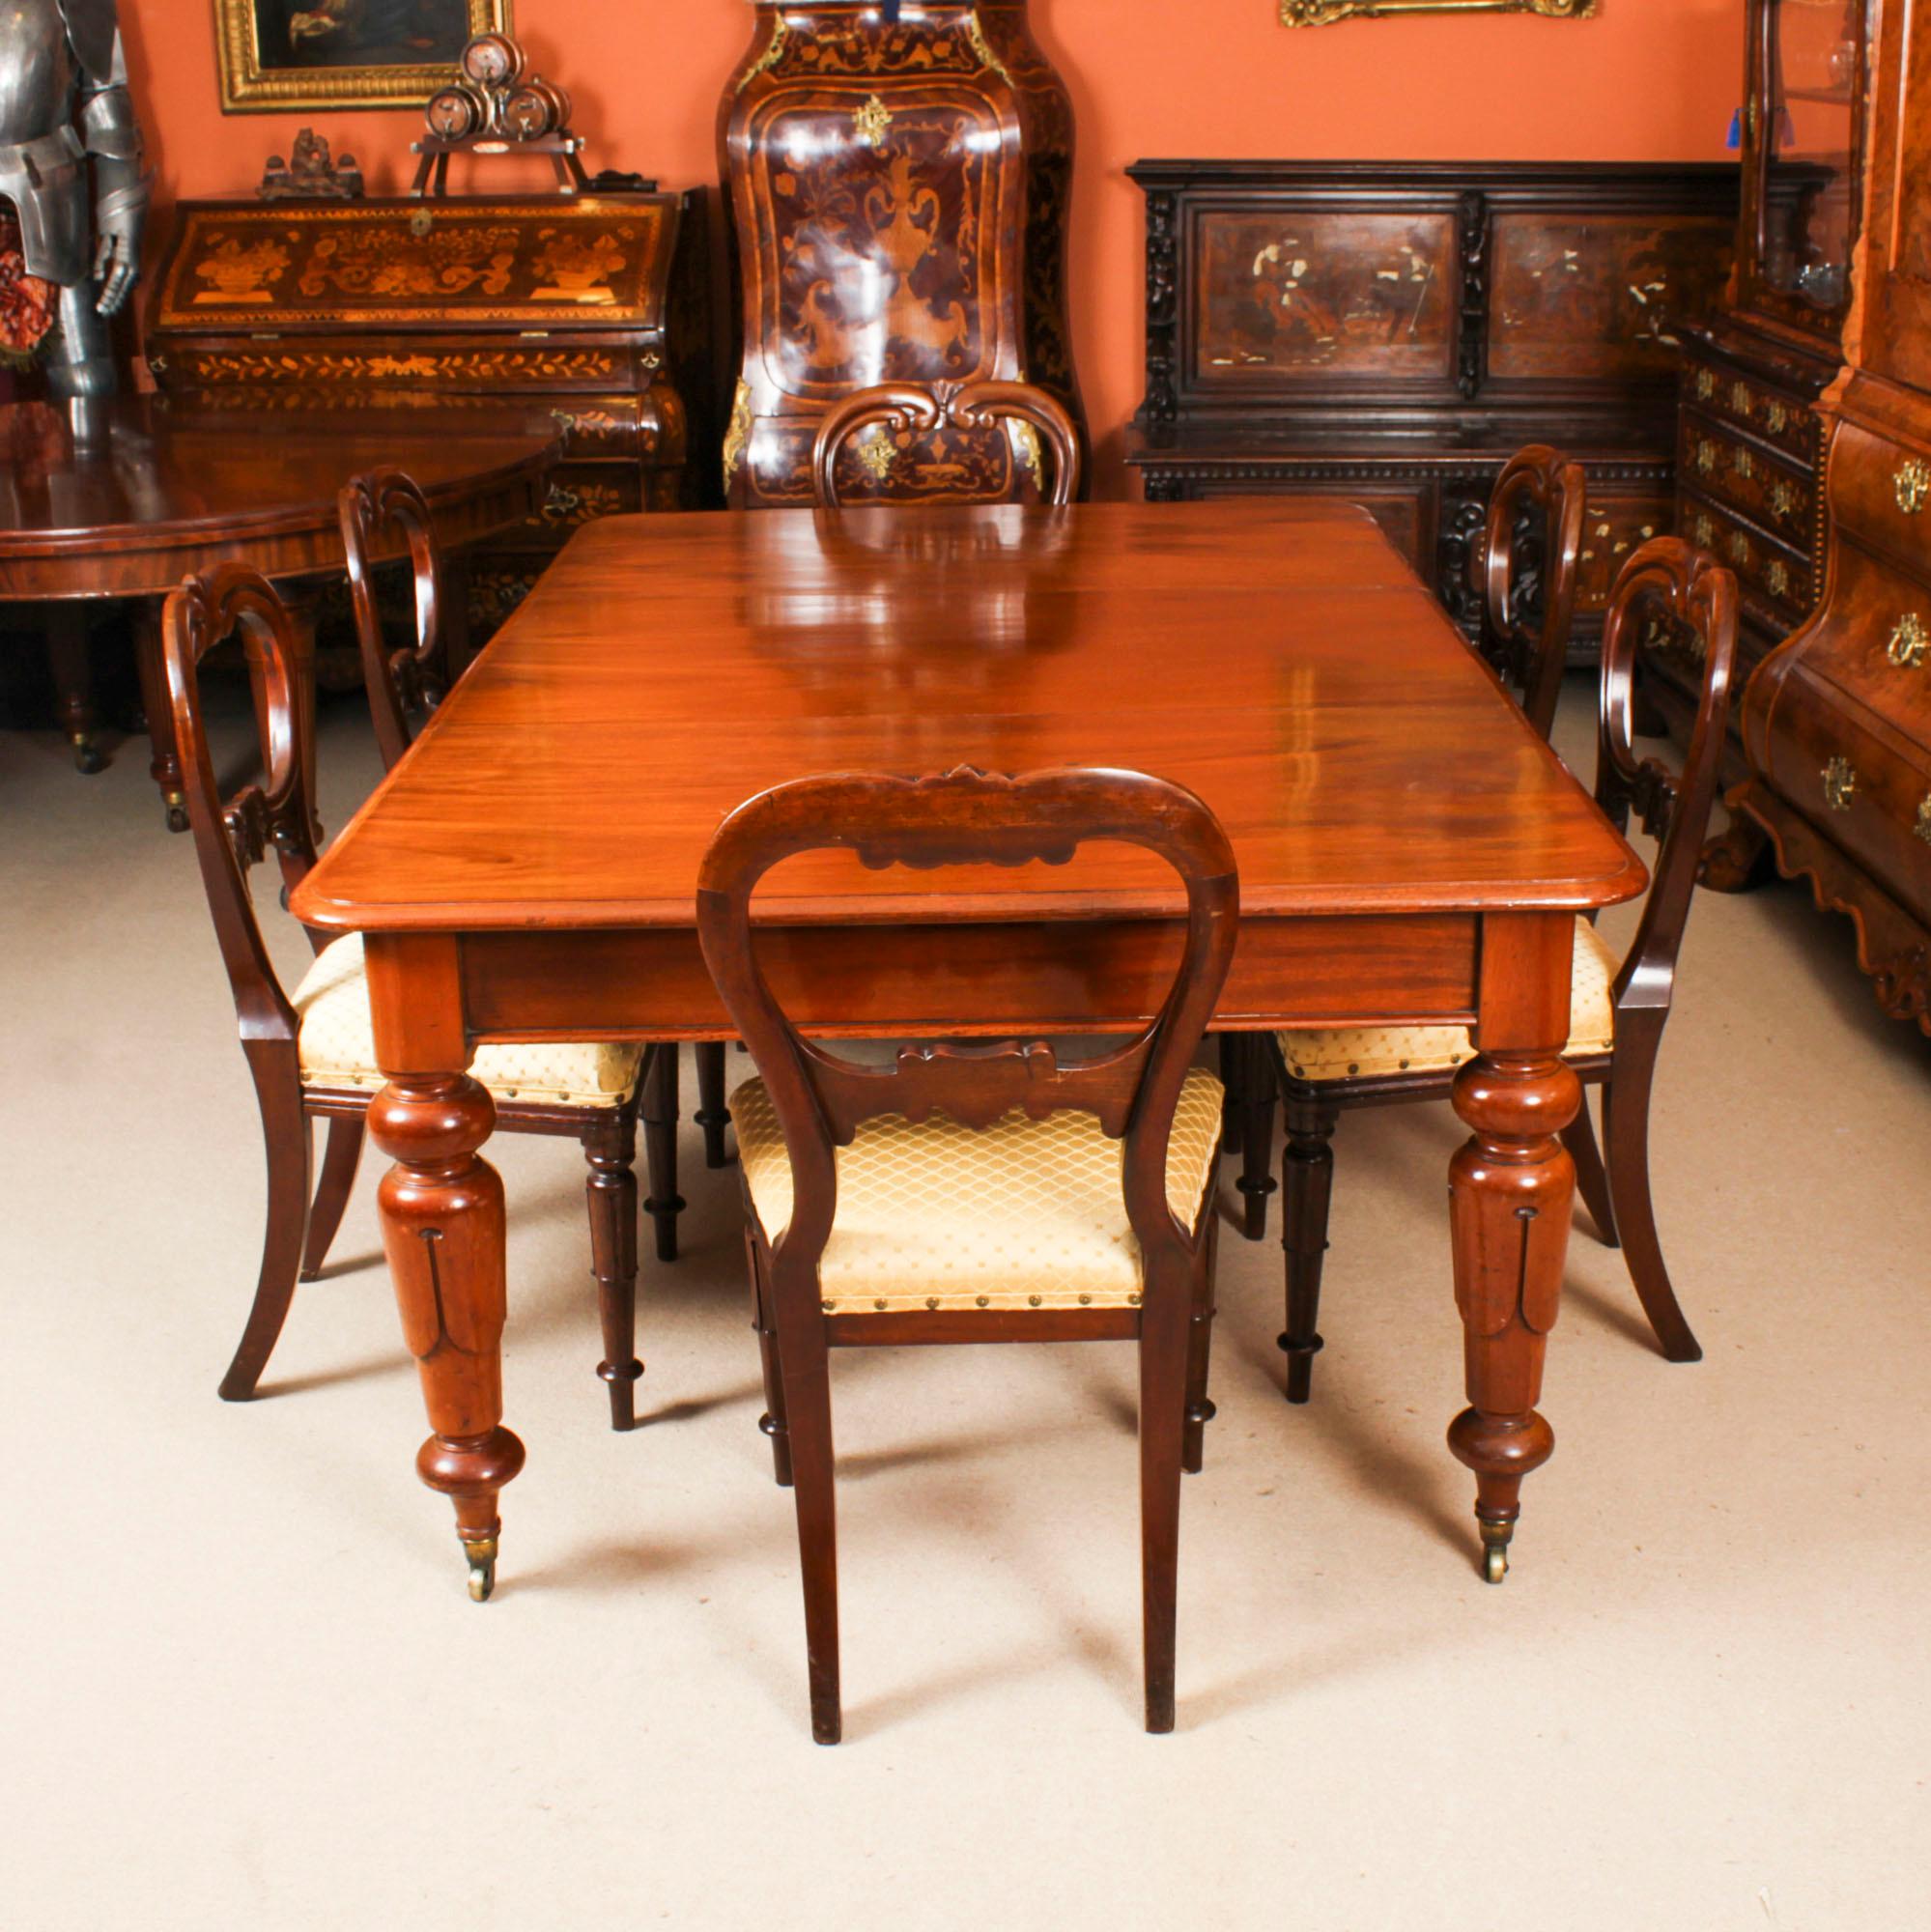 This is a beautiful dining set comprising an antique William IV flame mahogany dining table, Circa 1830 in date, and a beautiful set of six William IV Mahogany Dining Chairs c1830.
 
This amazing table can seat eight people in comfort and has been